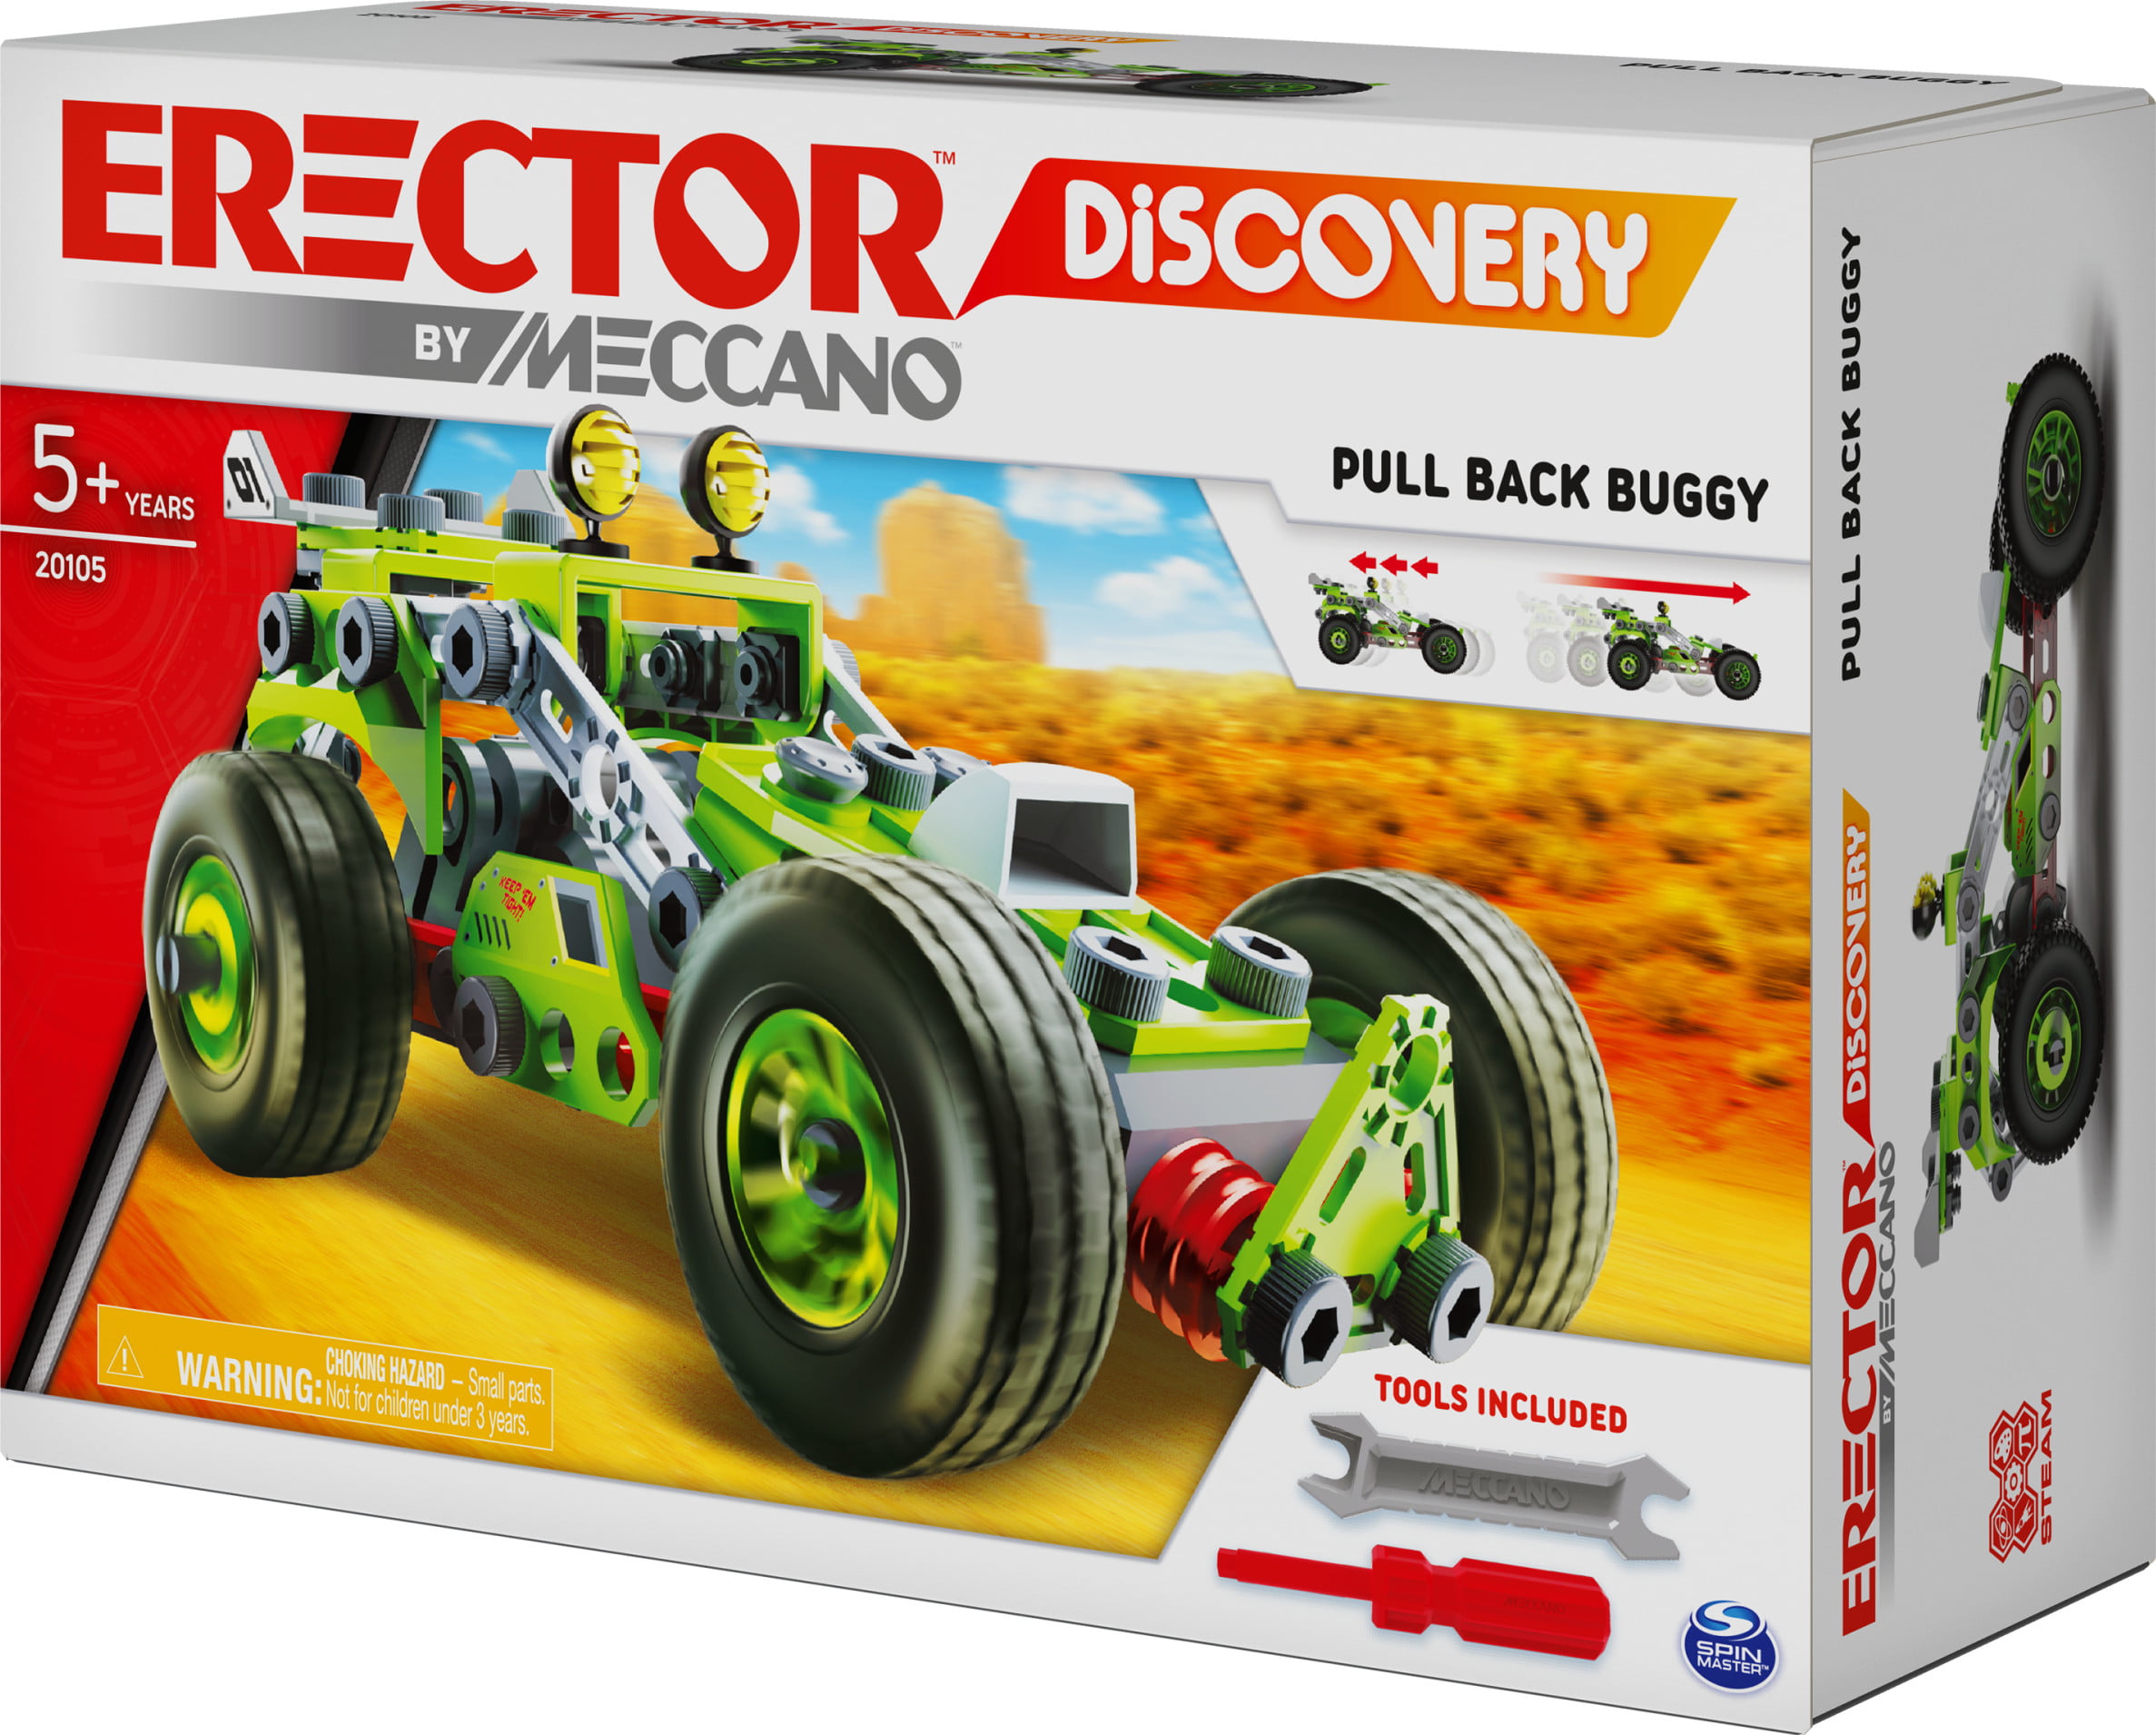 Erector by Meccano Discovery, Motorbike STEAM Model Building Kit